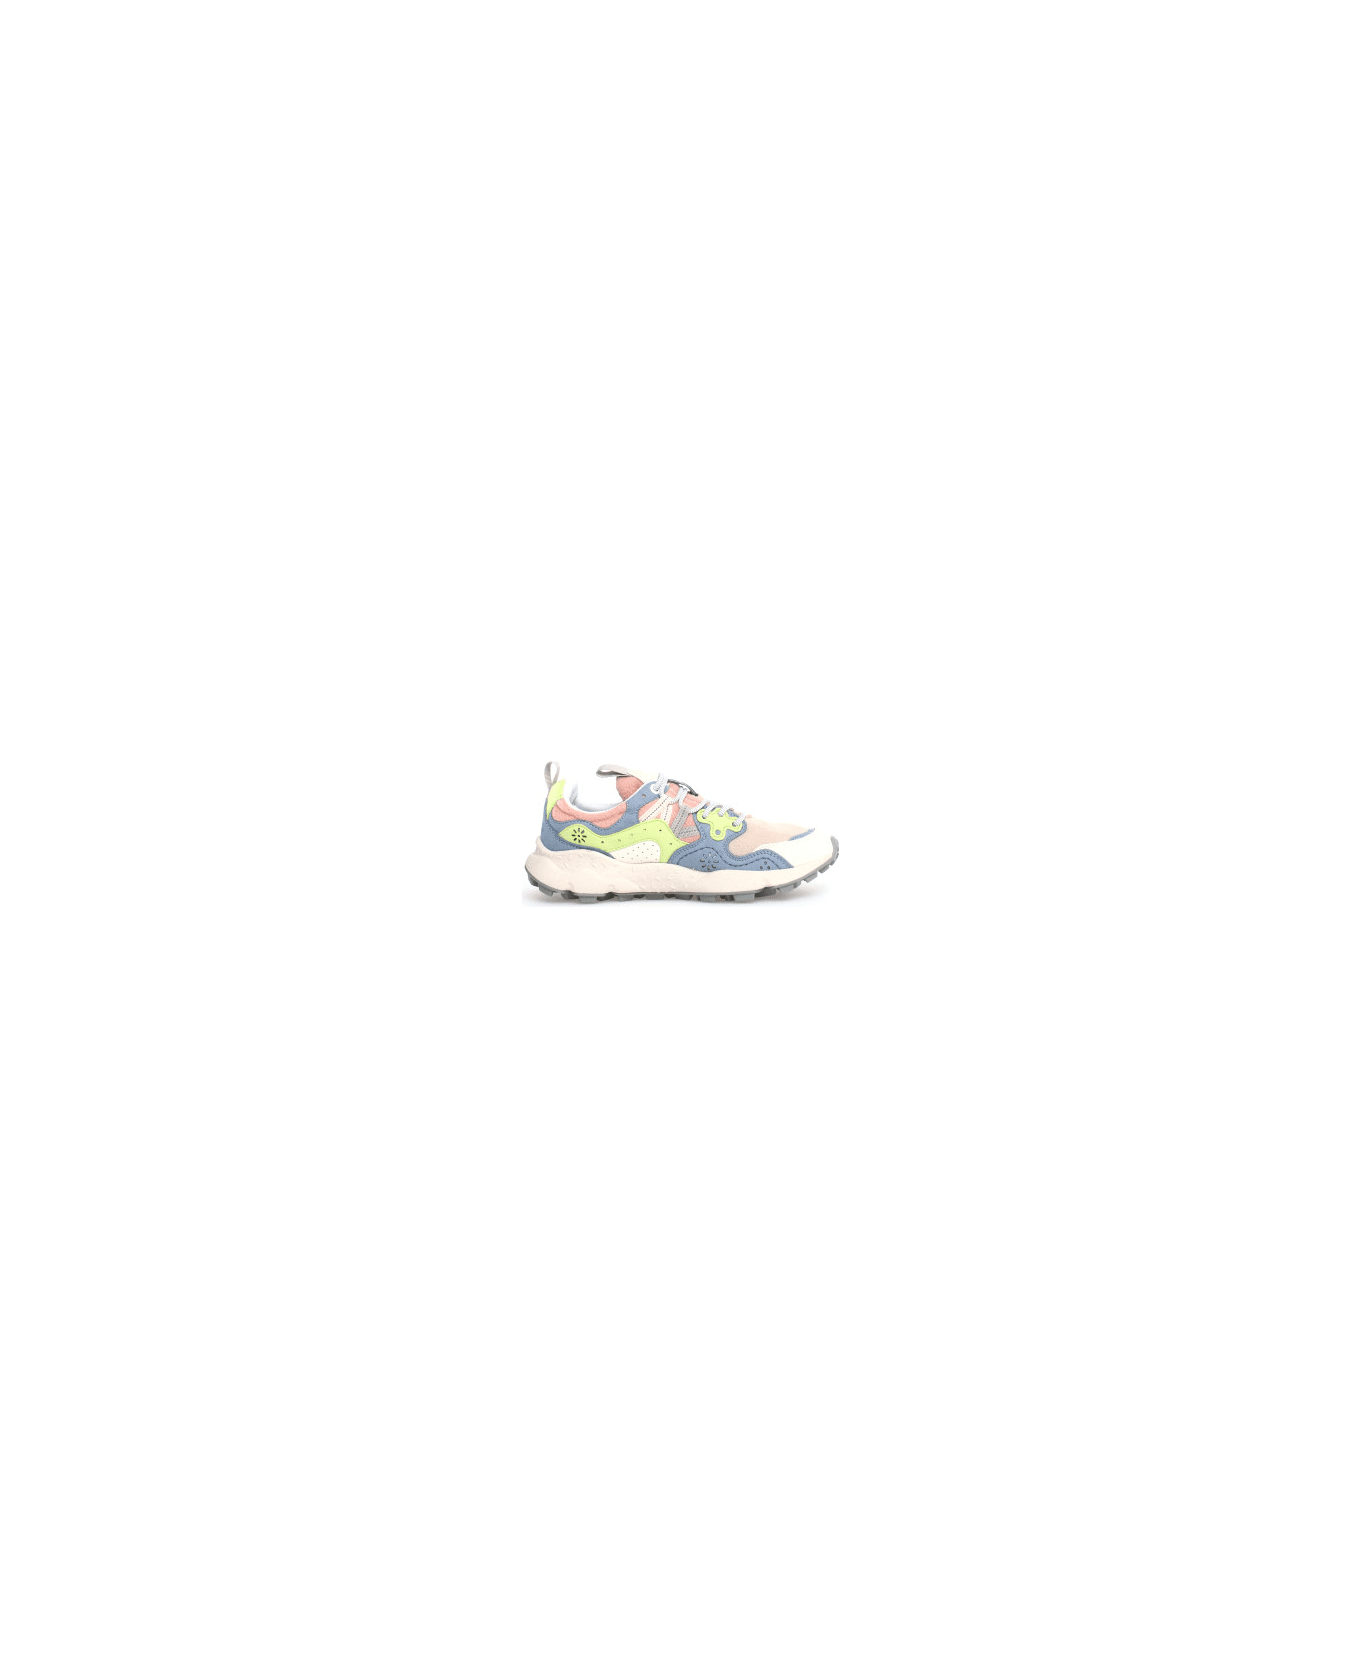 Flower Mountain Sneakers Yamano 3 - Multicolor